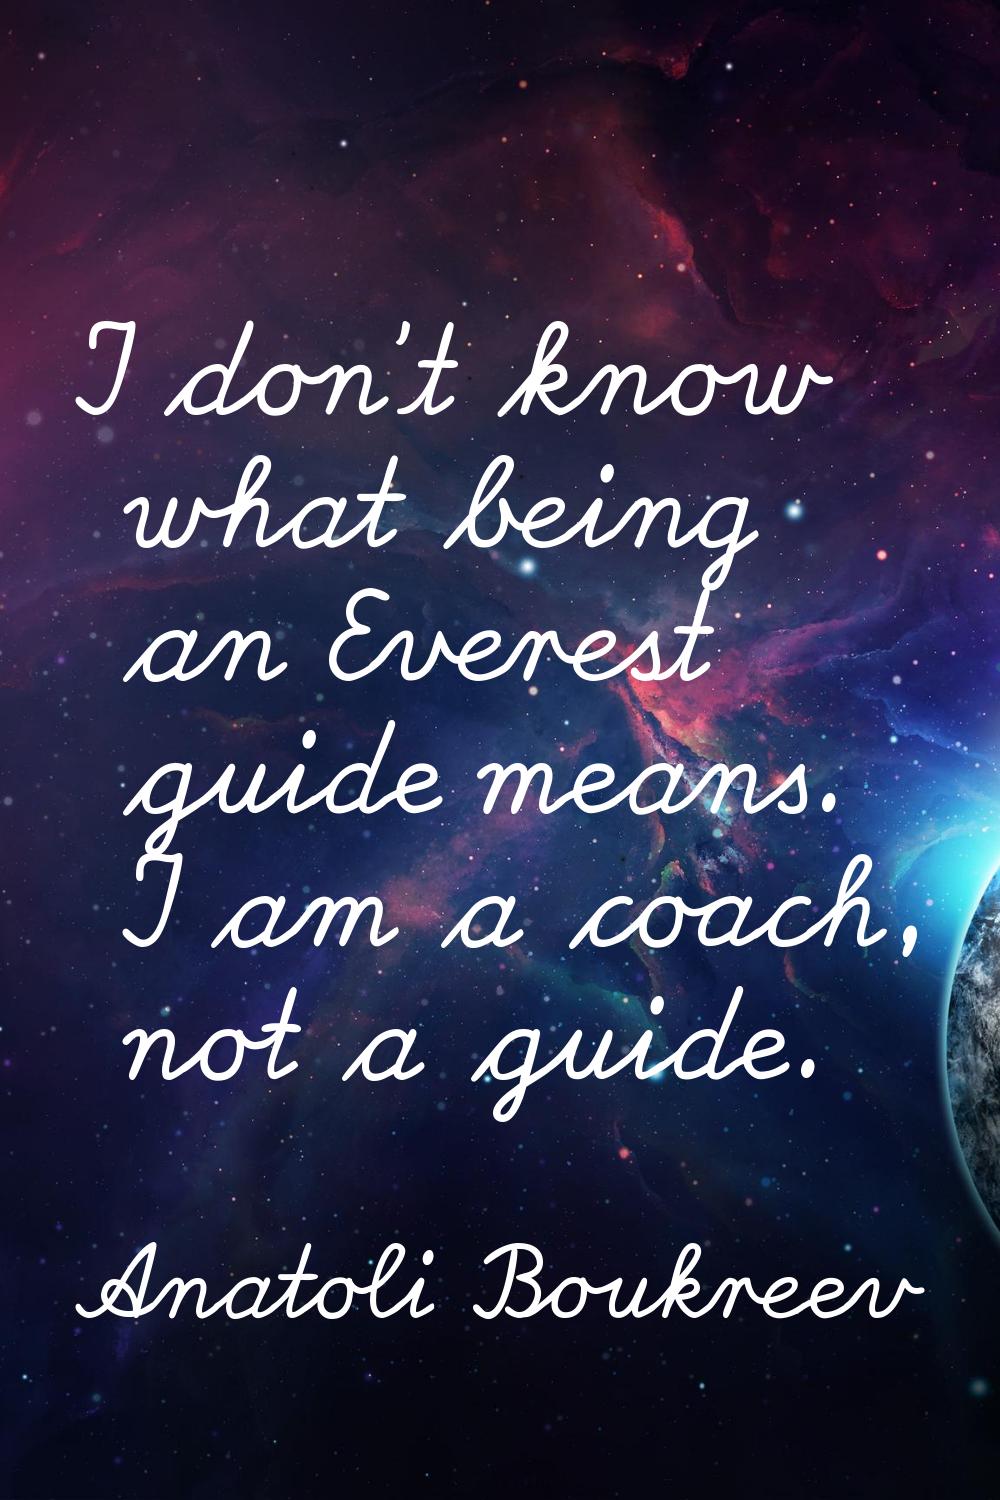 I don't know what being an Everest guide means. I am a coach, not a guide.